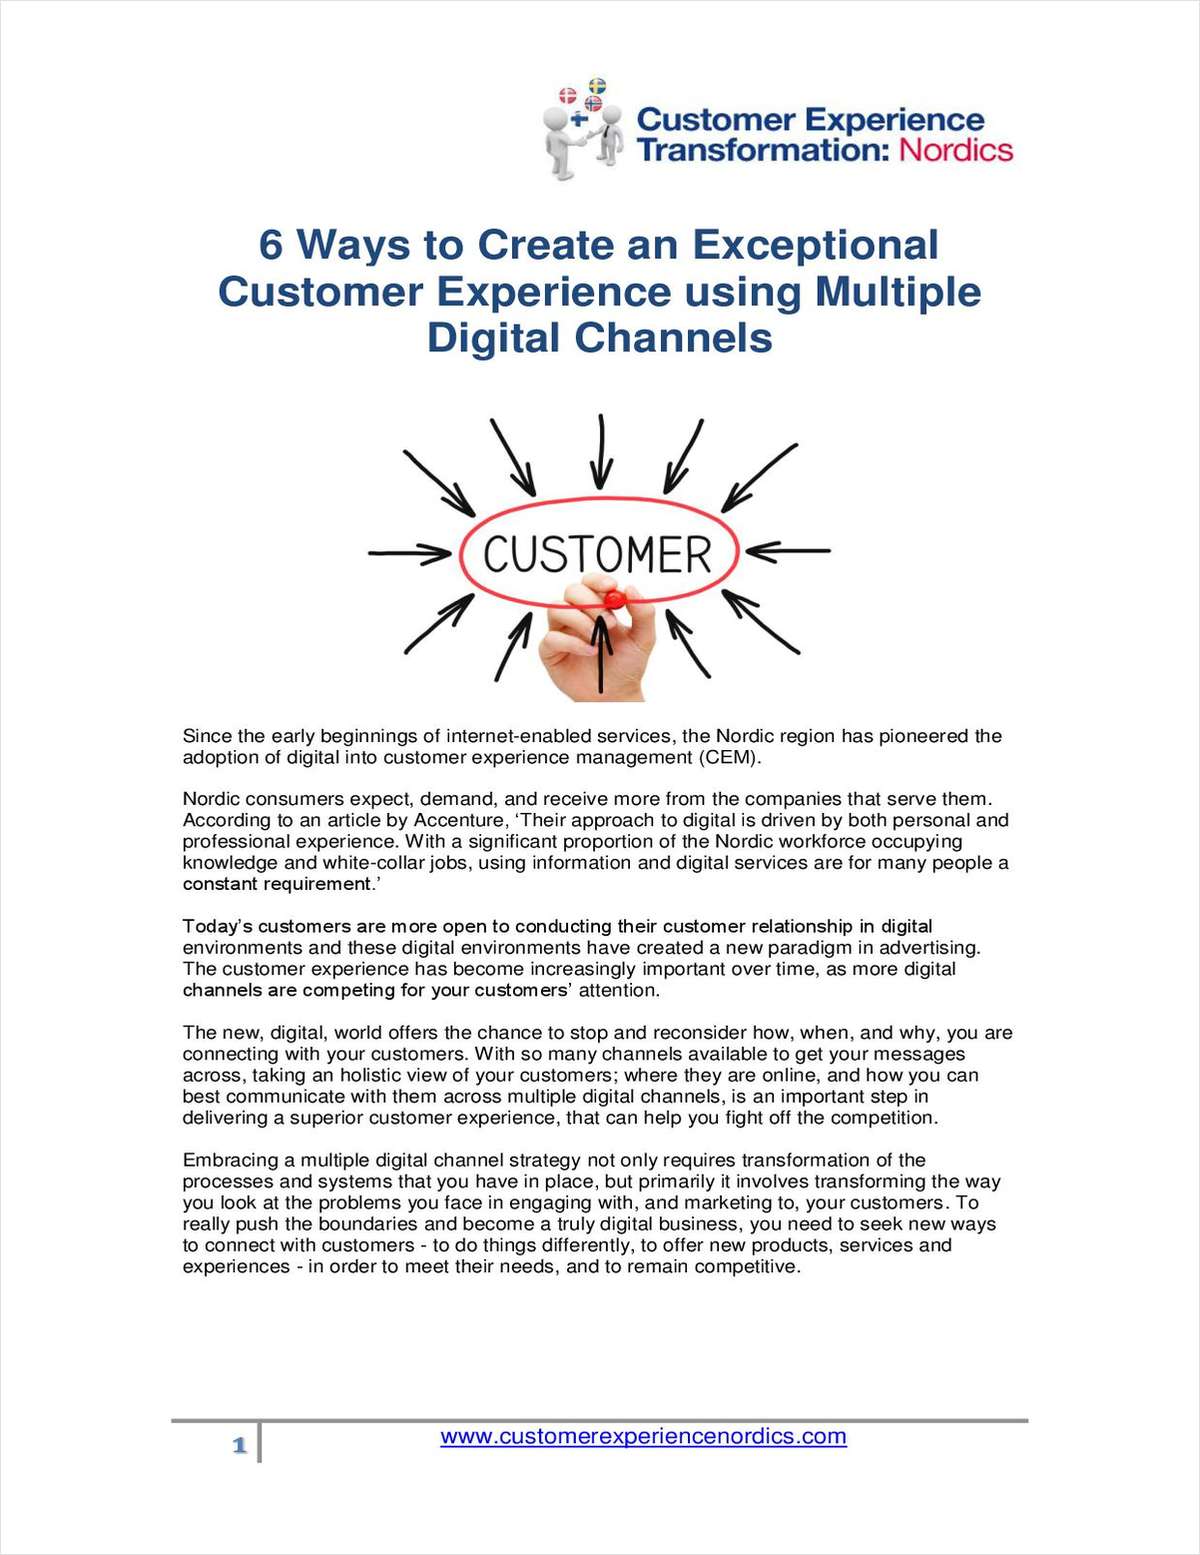 Article: 6 Ways to Create Exceptional Customer Experience Using Multiple Digital Channels